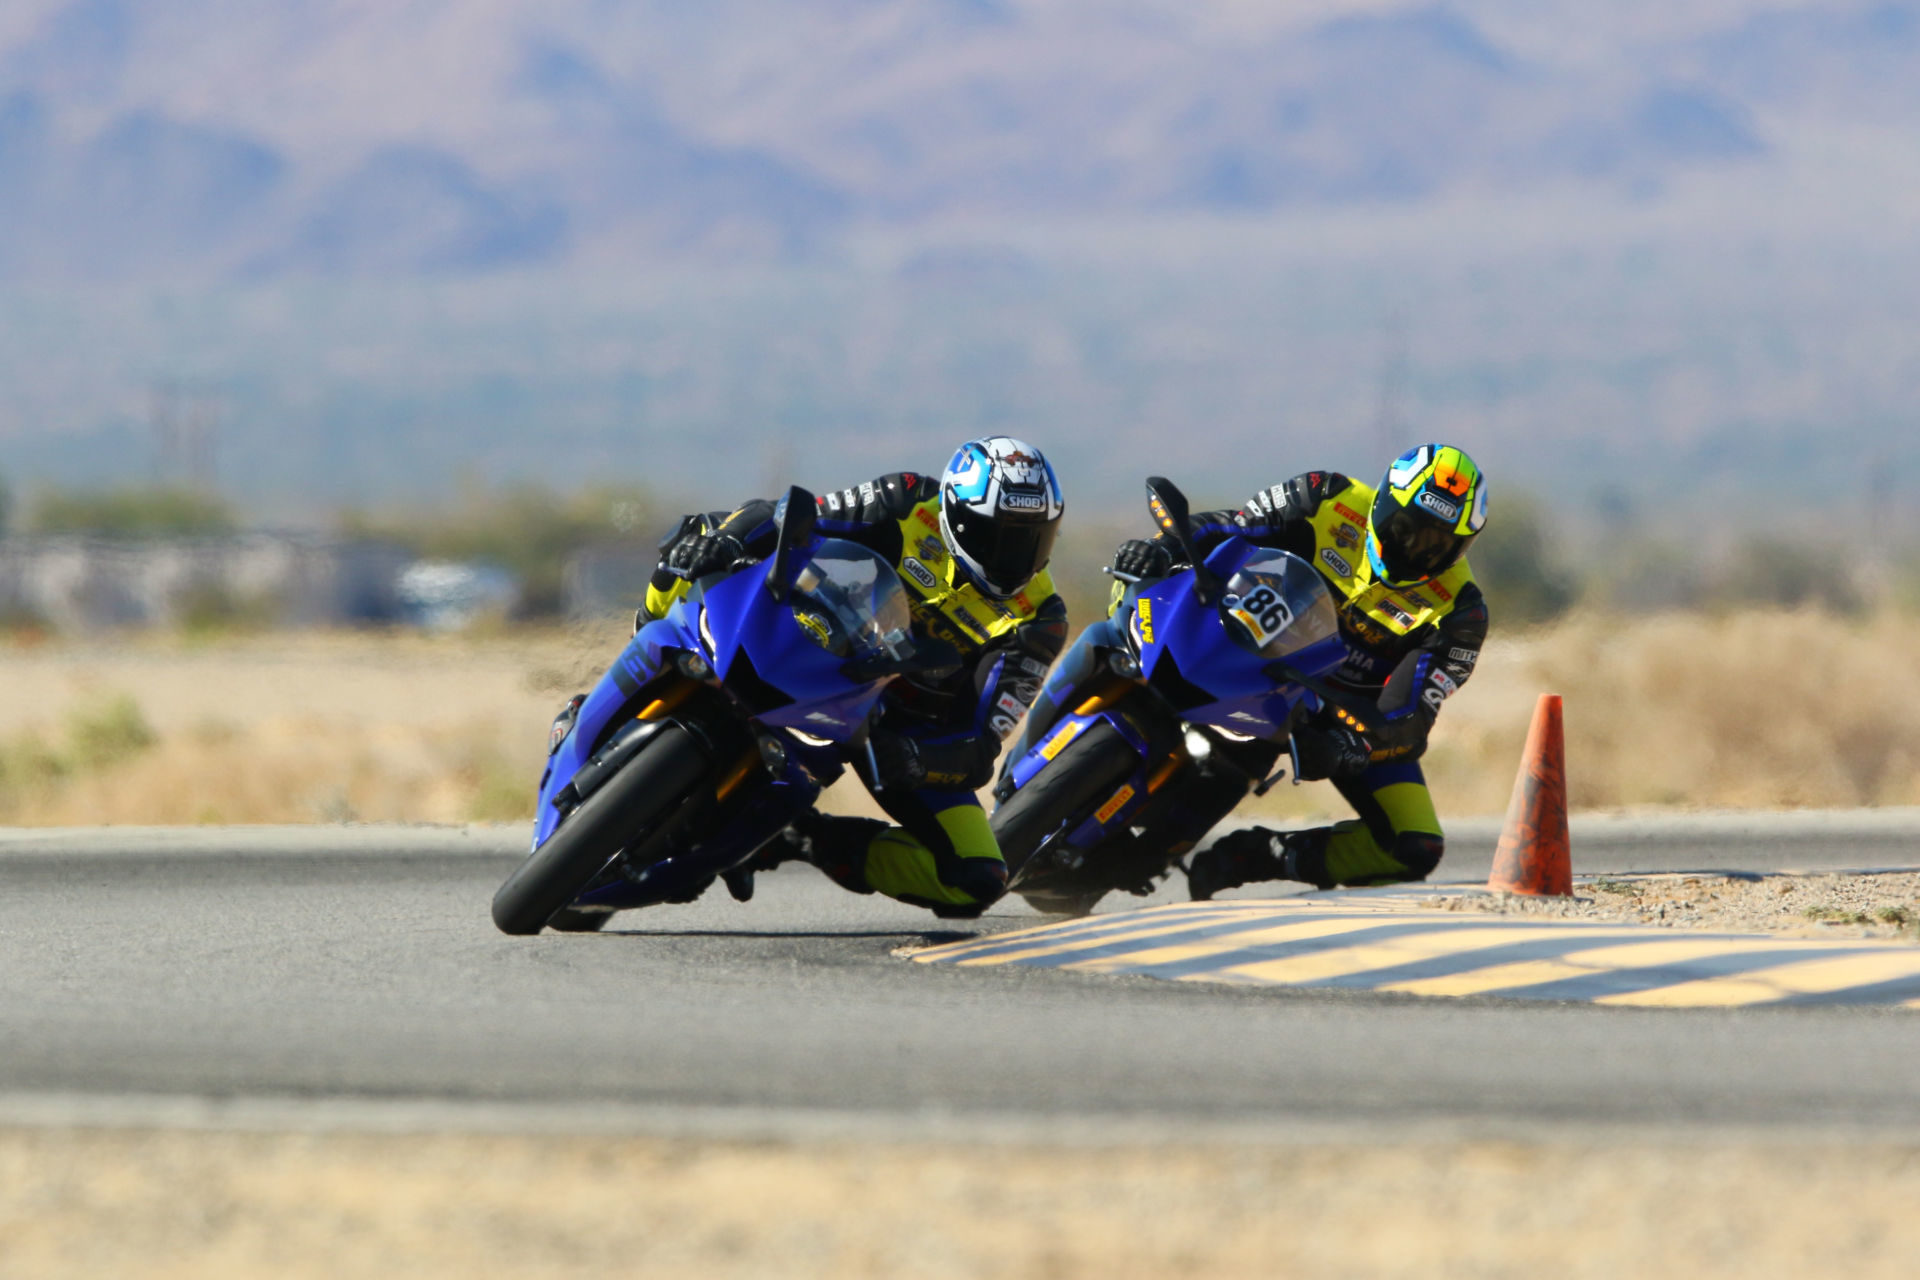 Riders in action during a TrackDaz track day. Photo by CaliPhotography.com, courtesy TrackDaz.